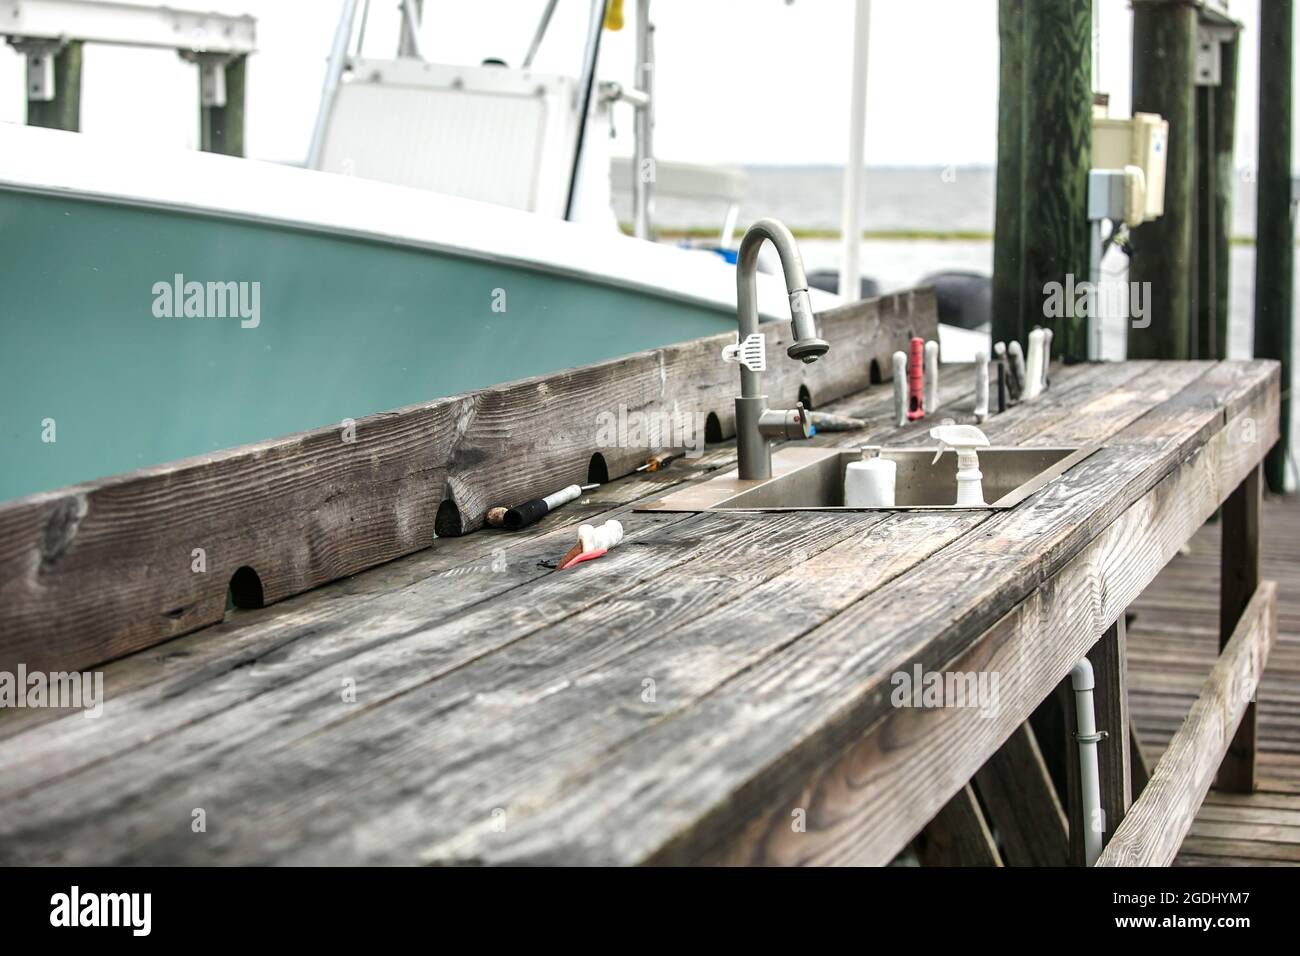 An old rustic and worn wood fish cleaning station on the dock of a pier  with a boat nearby Stock Photo - Alamy